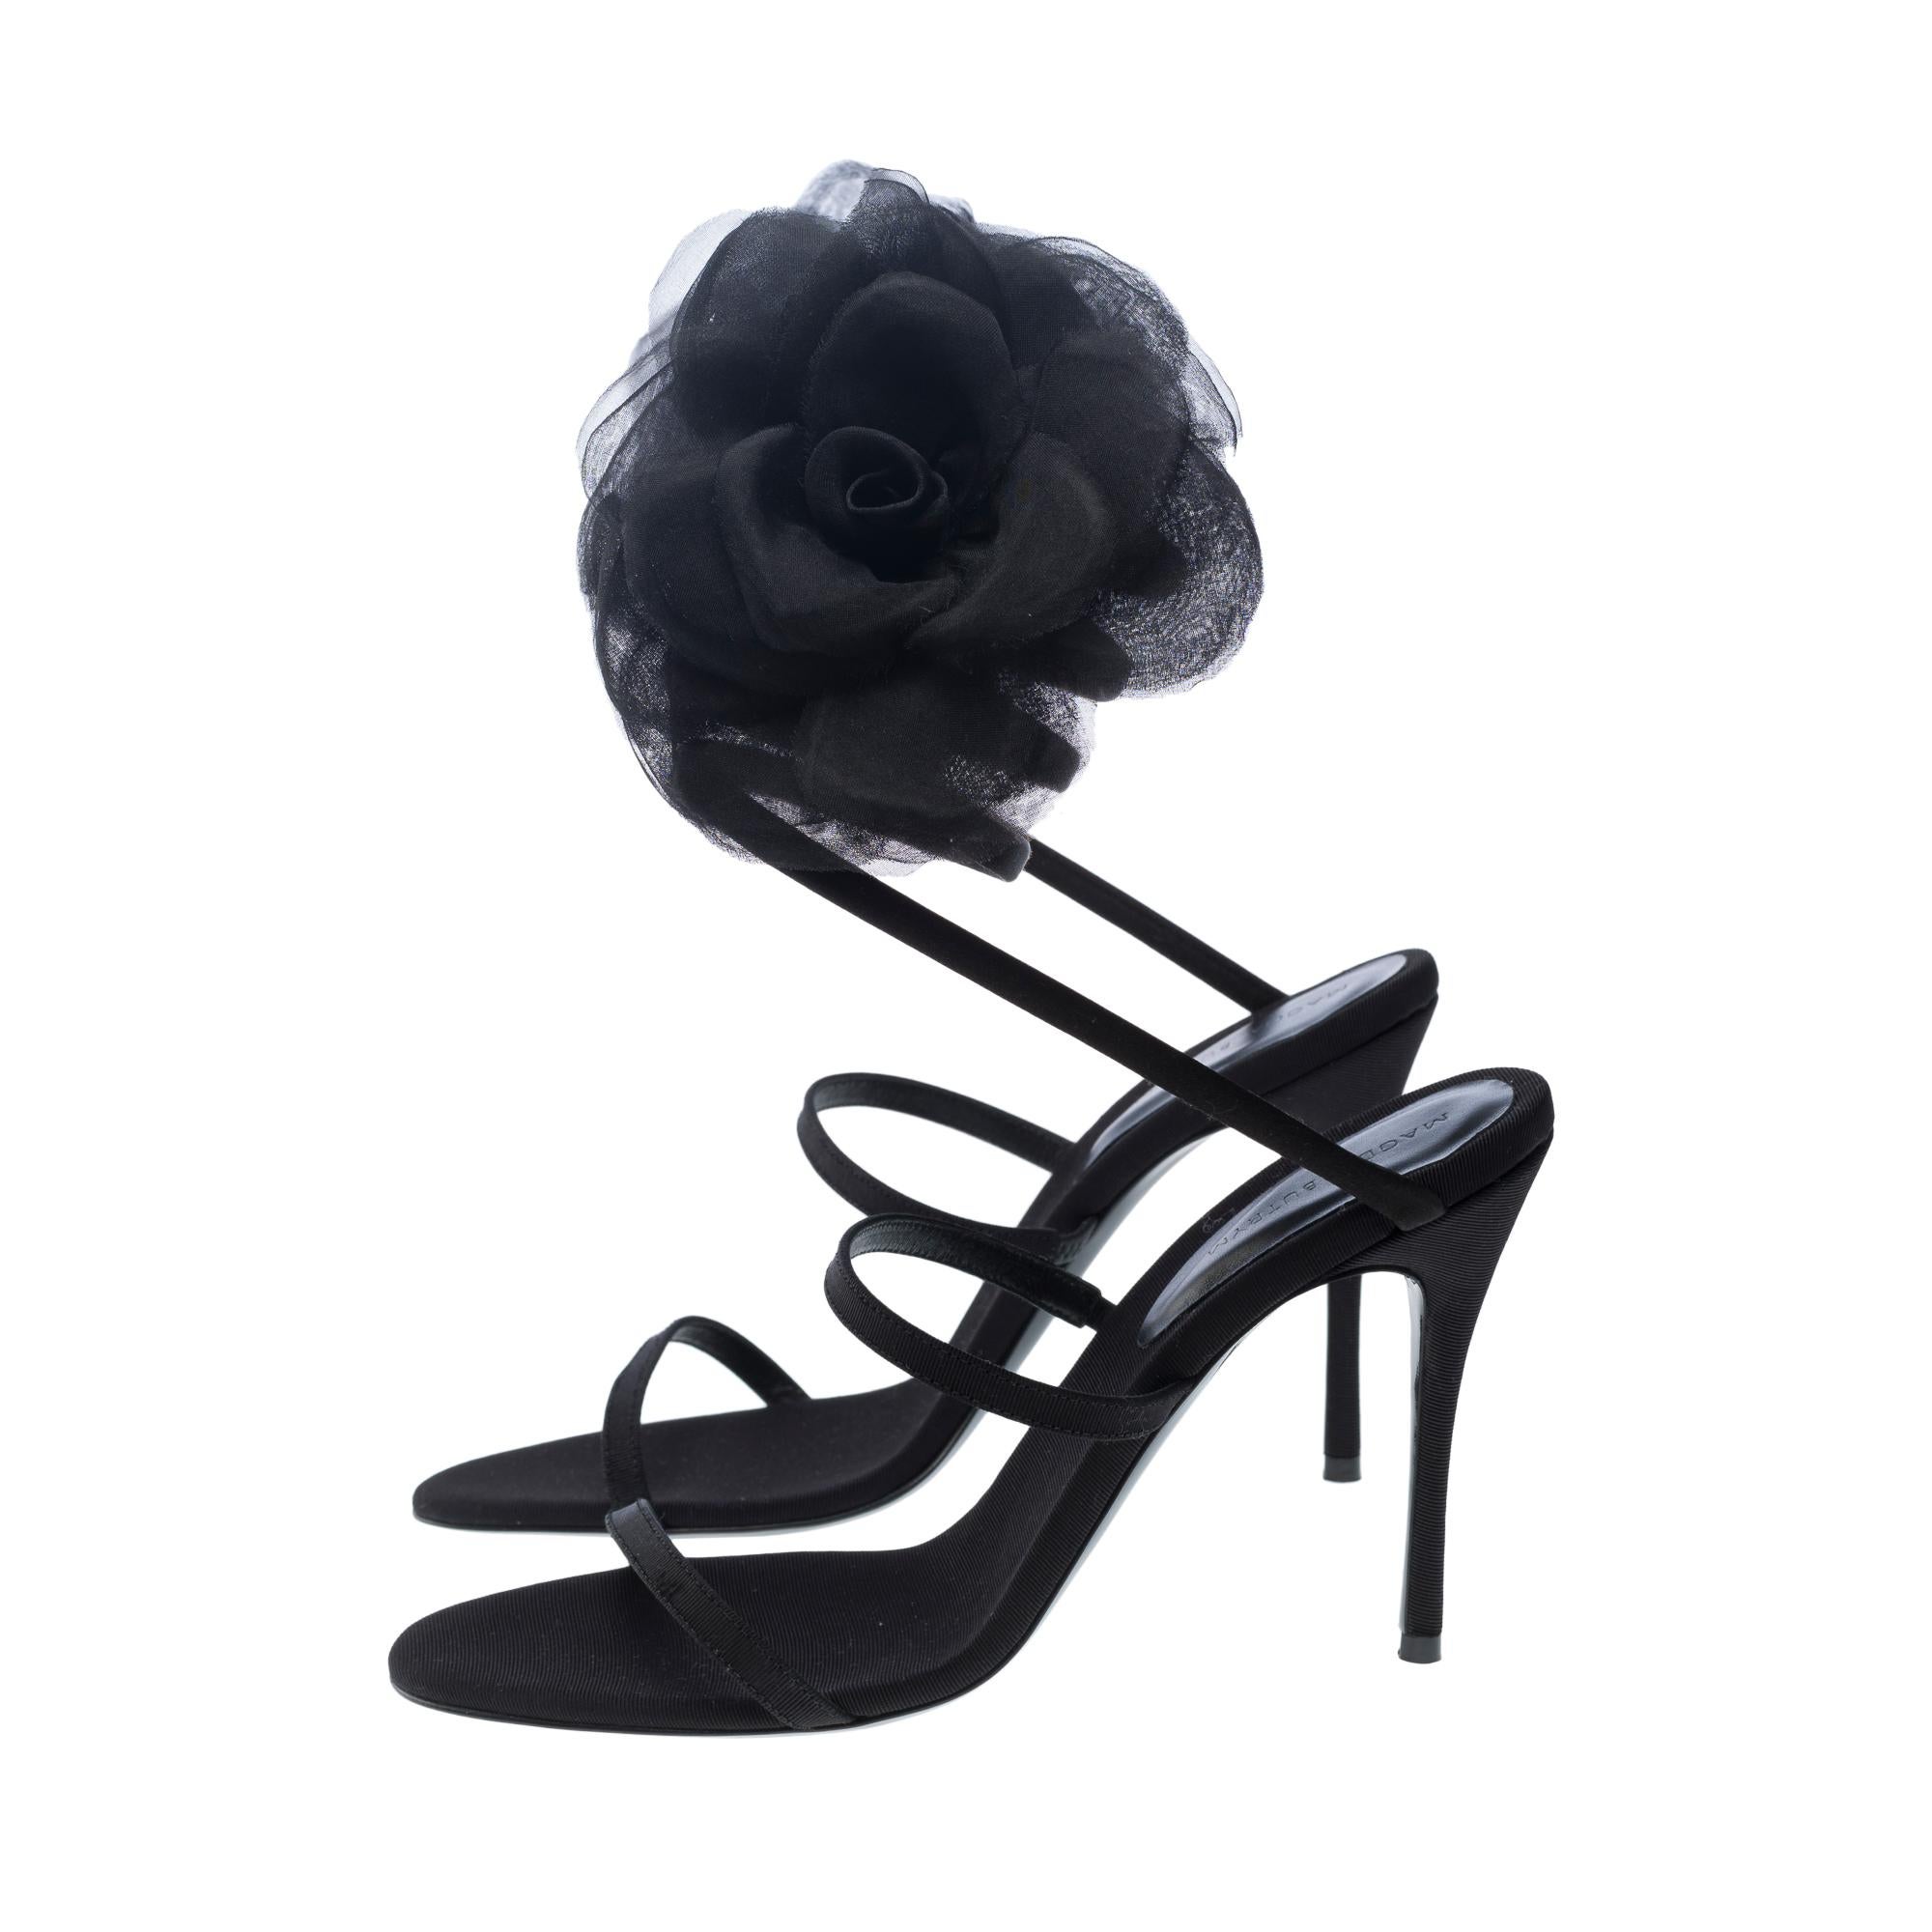 New Magda Butrym Peep Toe Mules in black satin , Size 39 For Sale 1